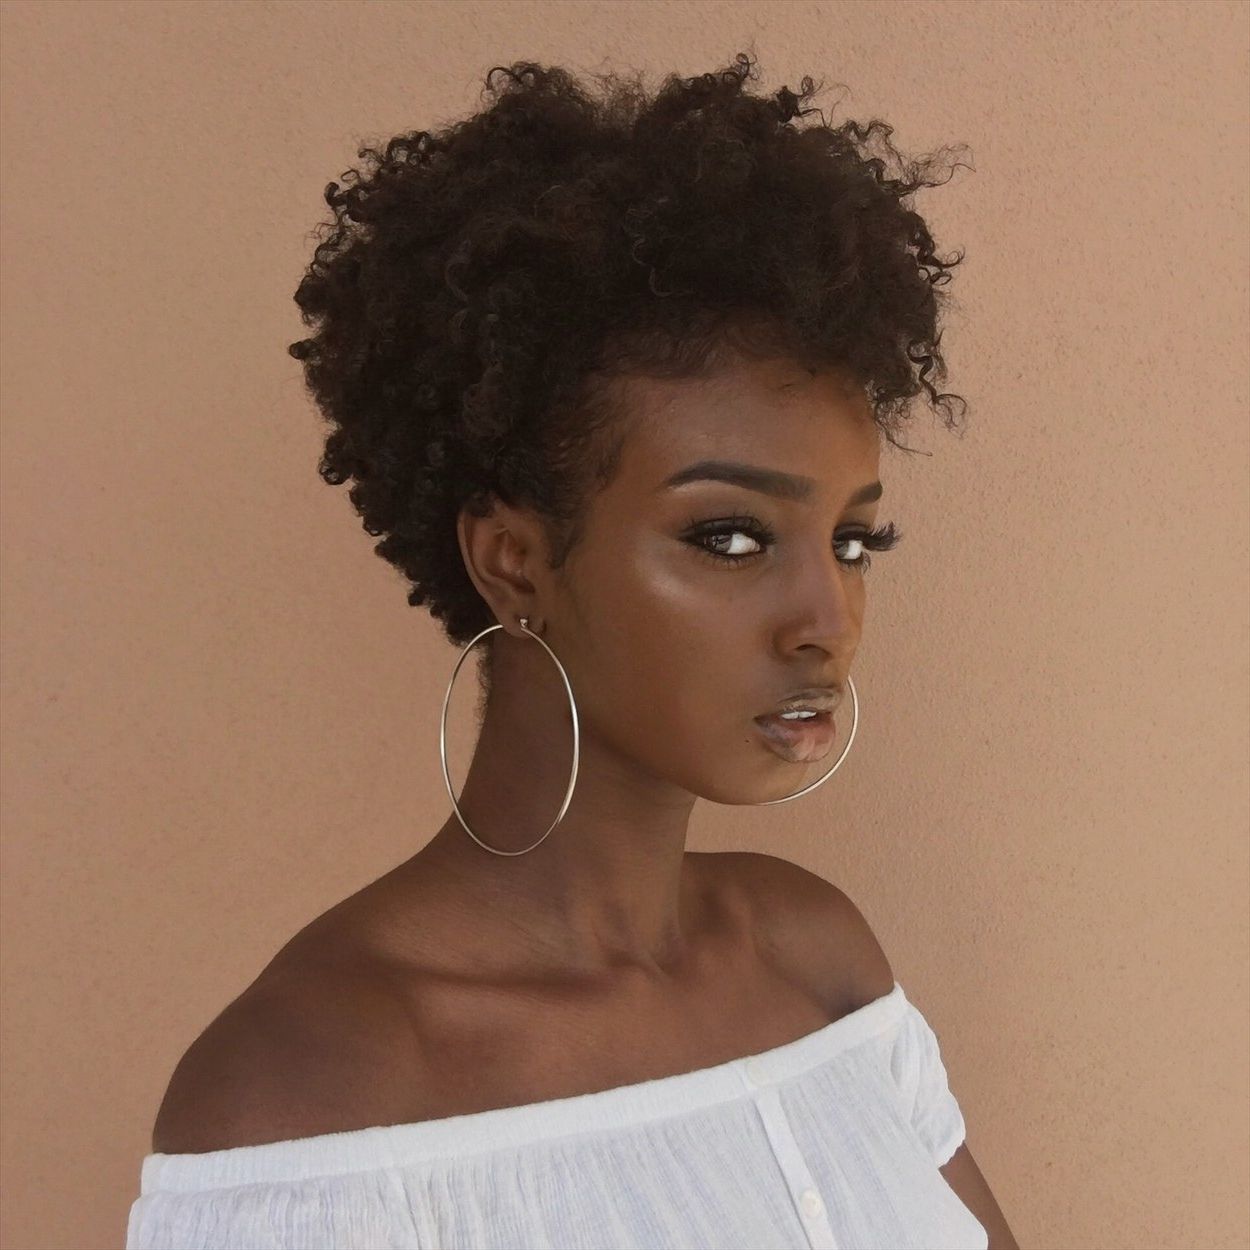 Glamour Pertaining To 2018 Short Black Pixie Hairstyles For Curly Hair (View 10 of 20)